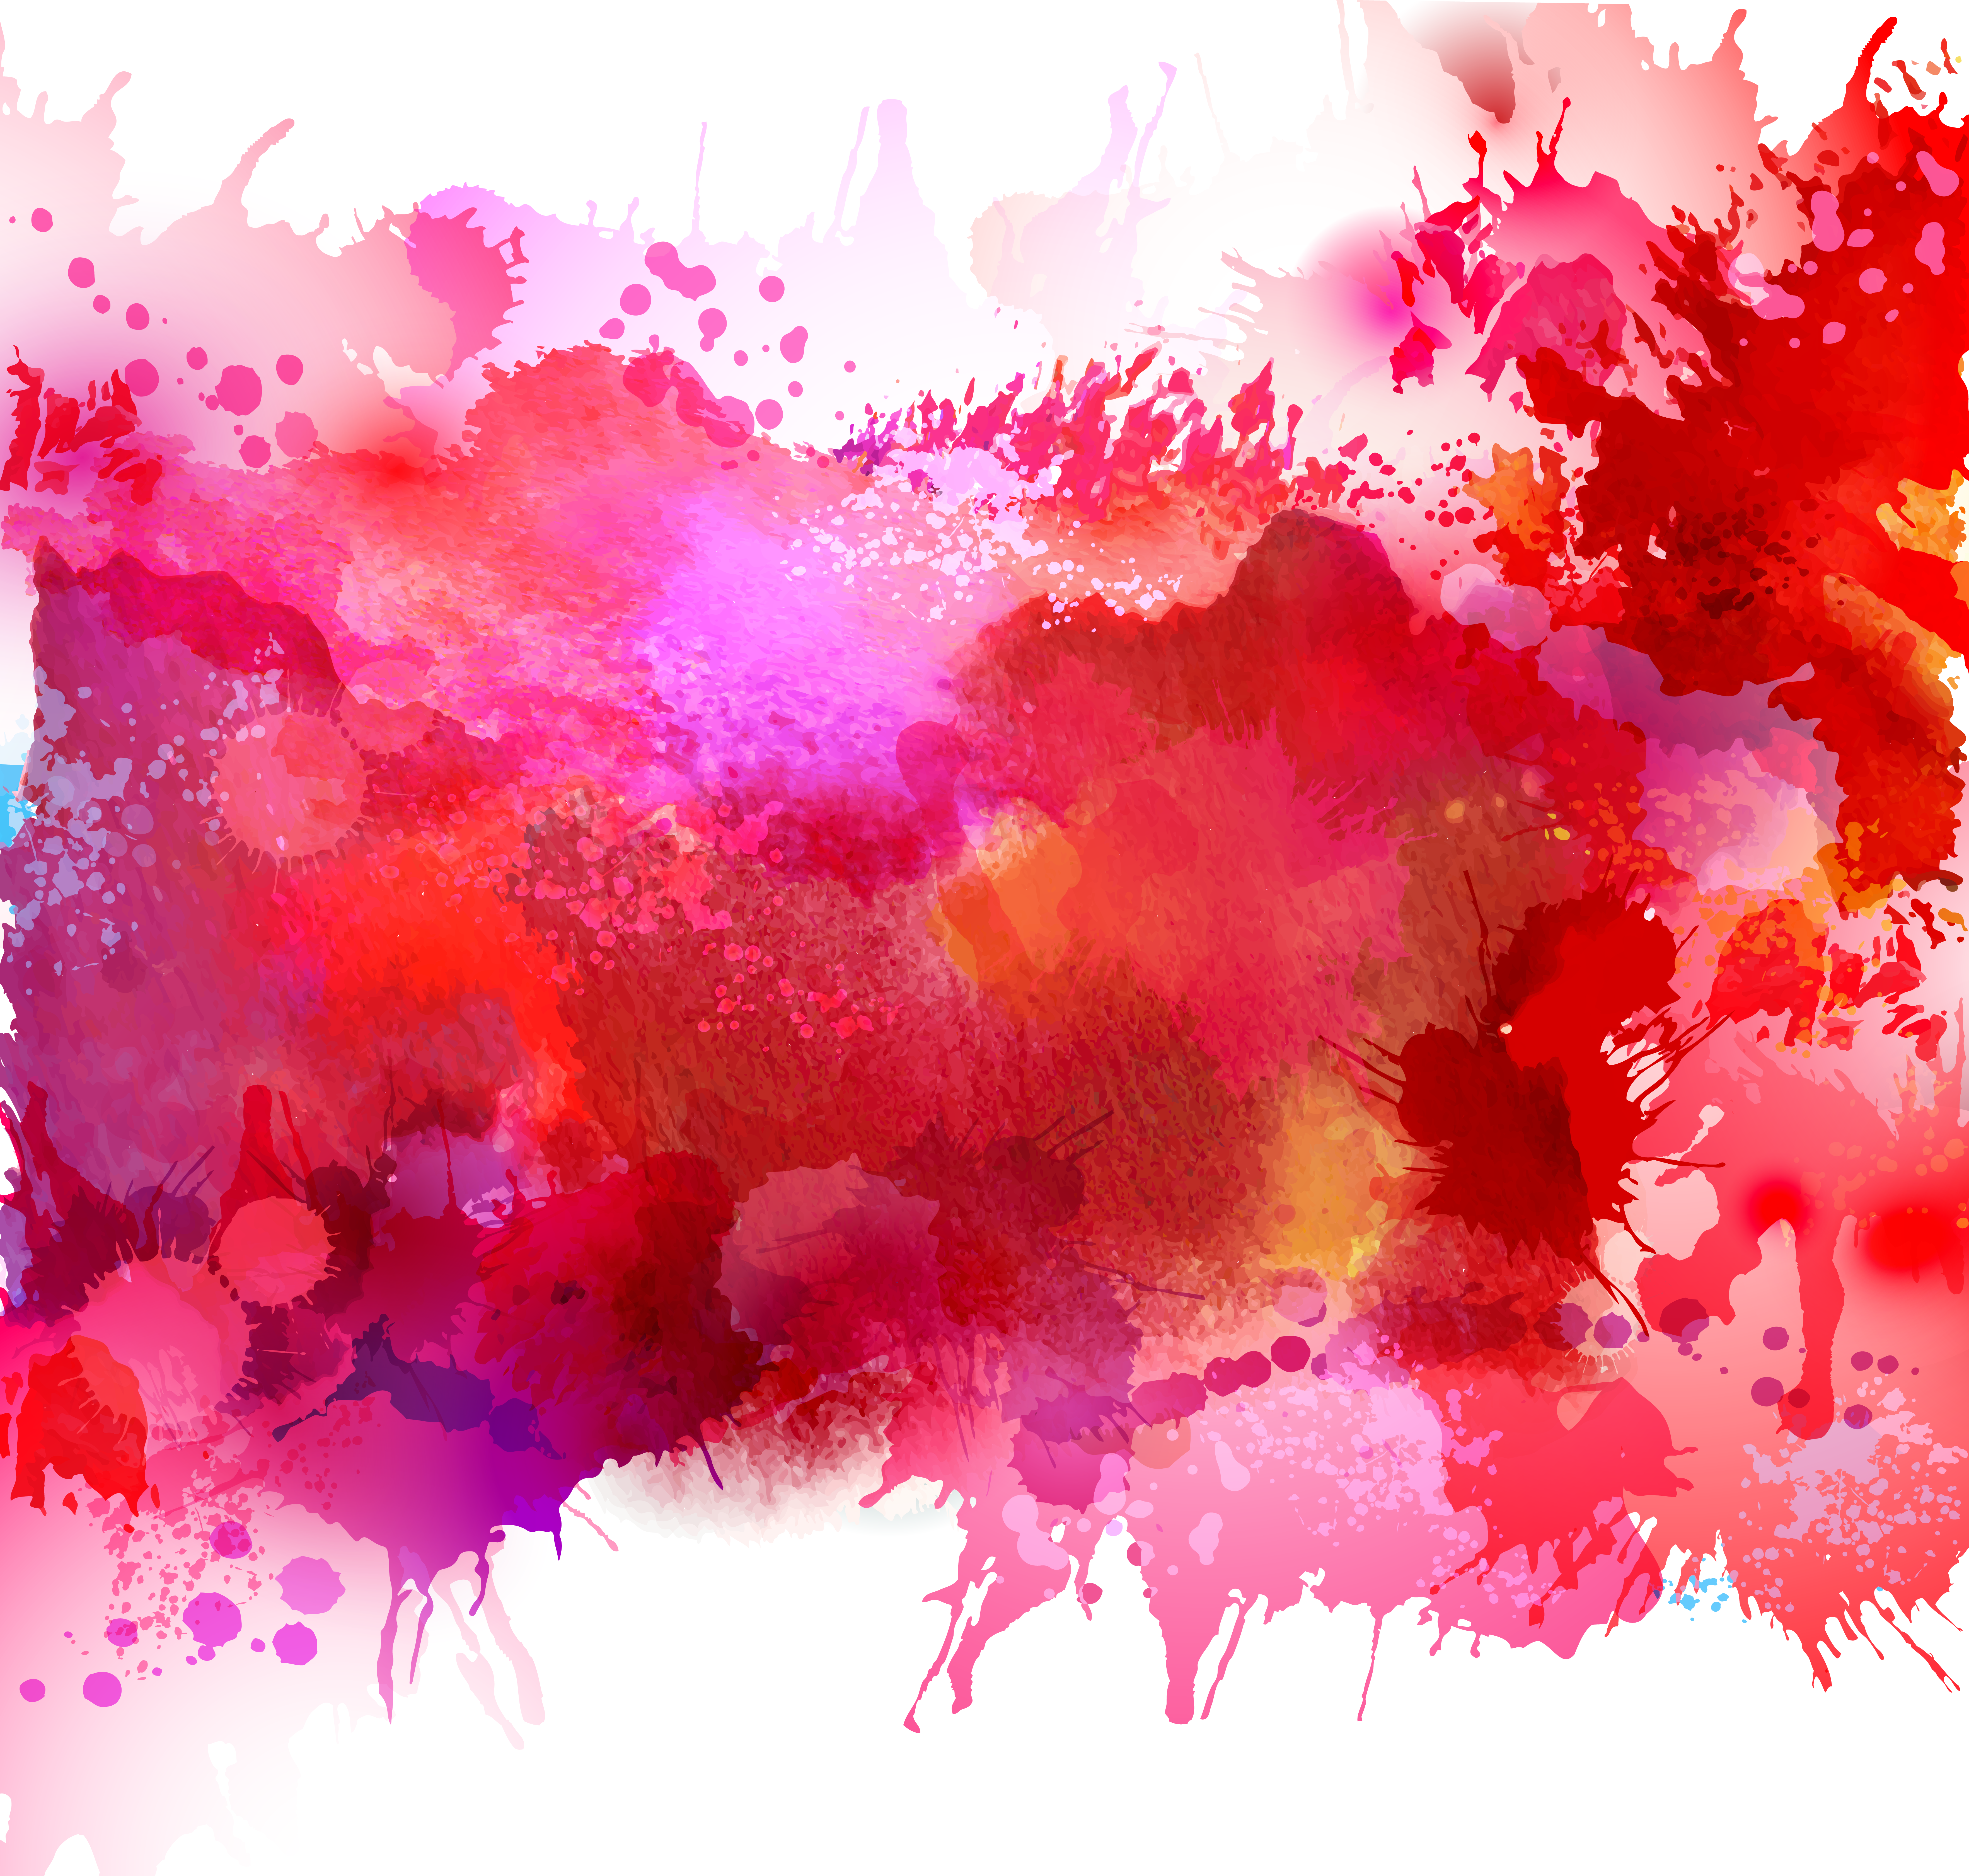 Download Watercolor Painting Illustration - Paint Background In Picsart PNG  Image with No Background 